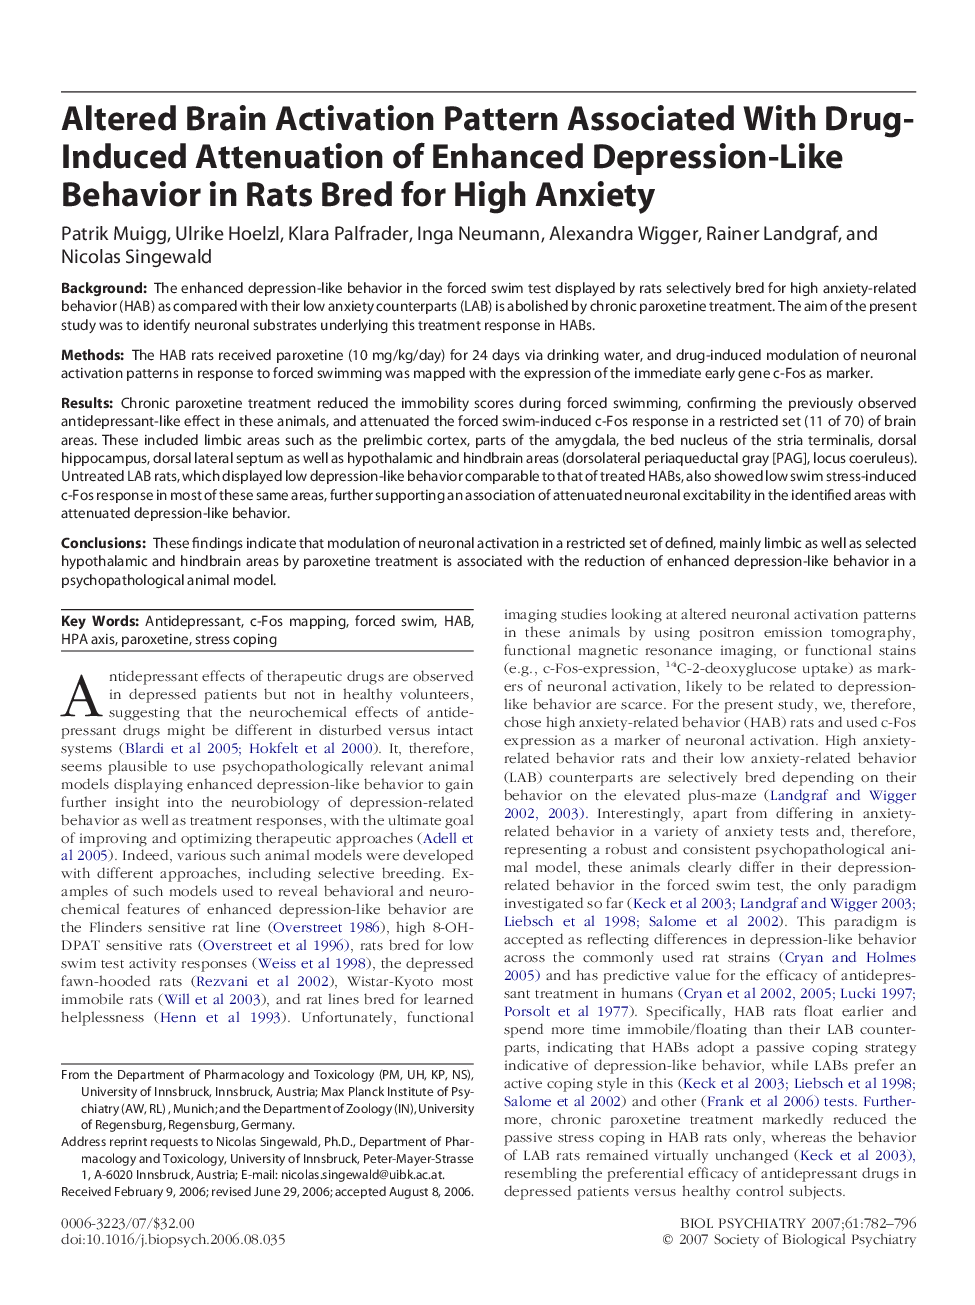 Altered Brain Activation Pattern Associated With Drug-Induced Attenuation of Enhanced Depression-Like Behavior in Rats Bred for High Anxiety